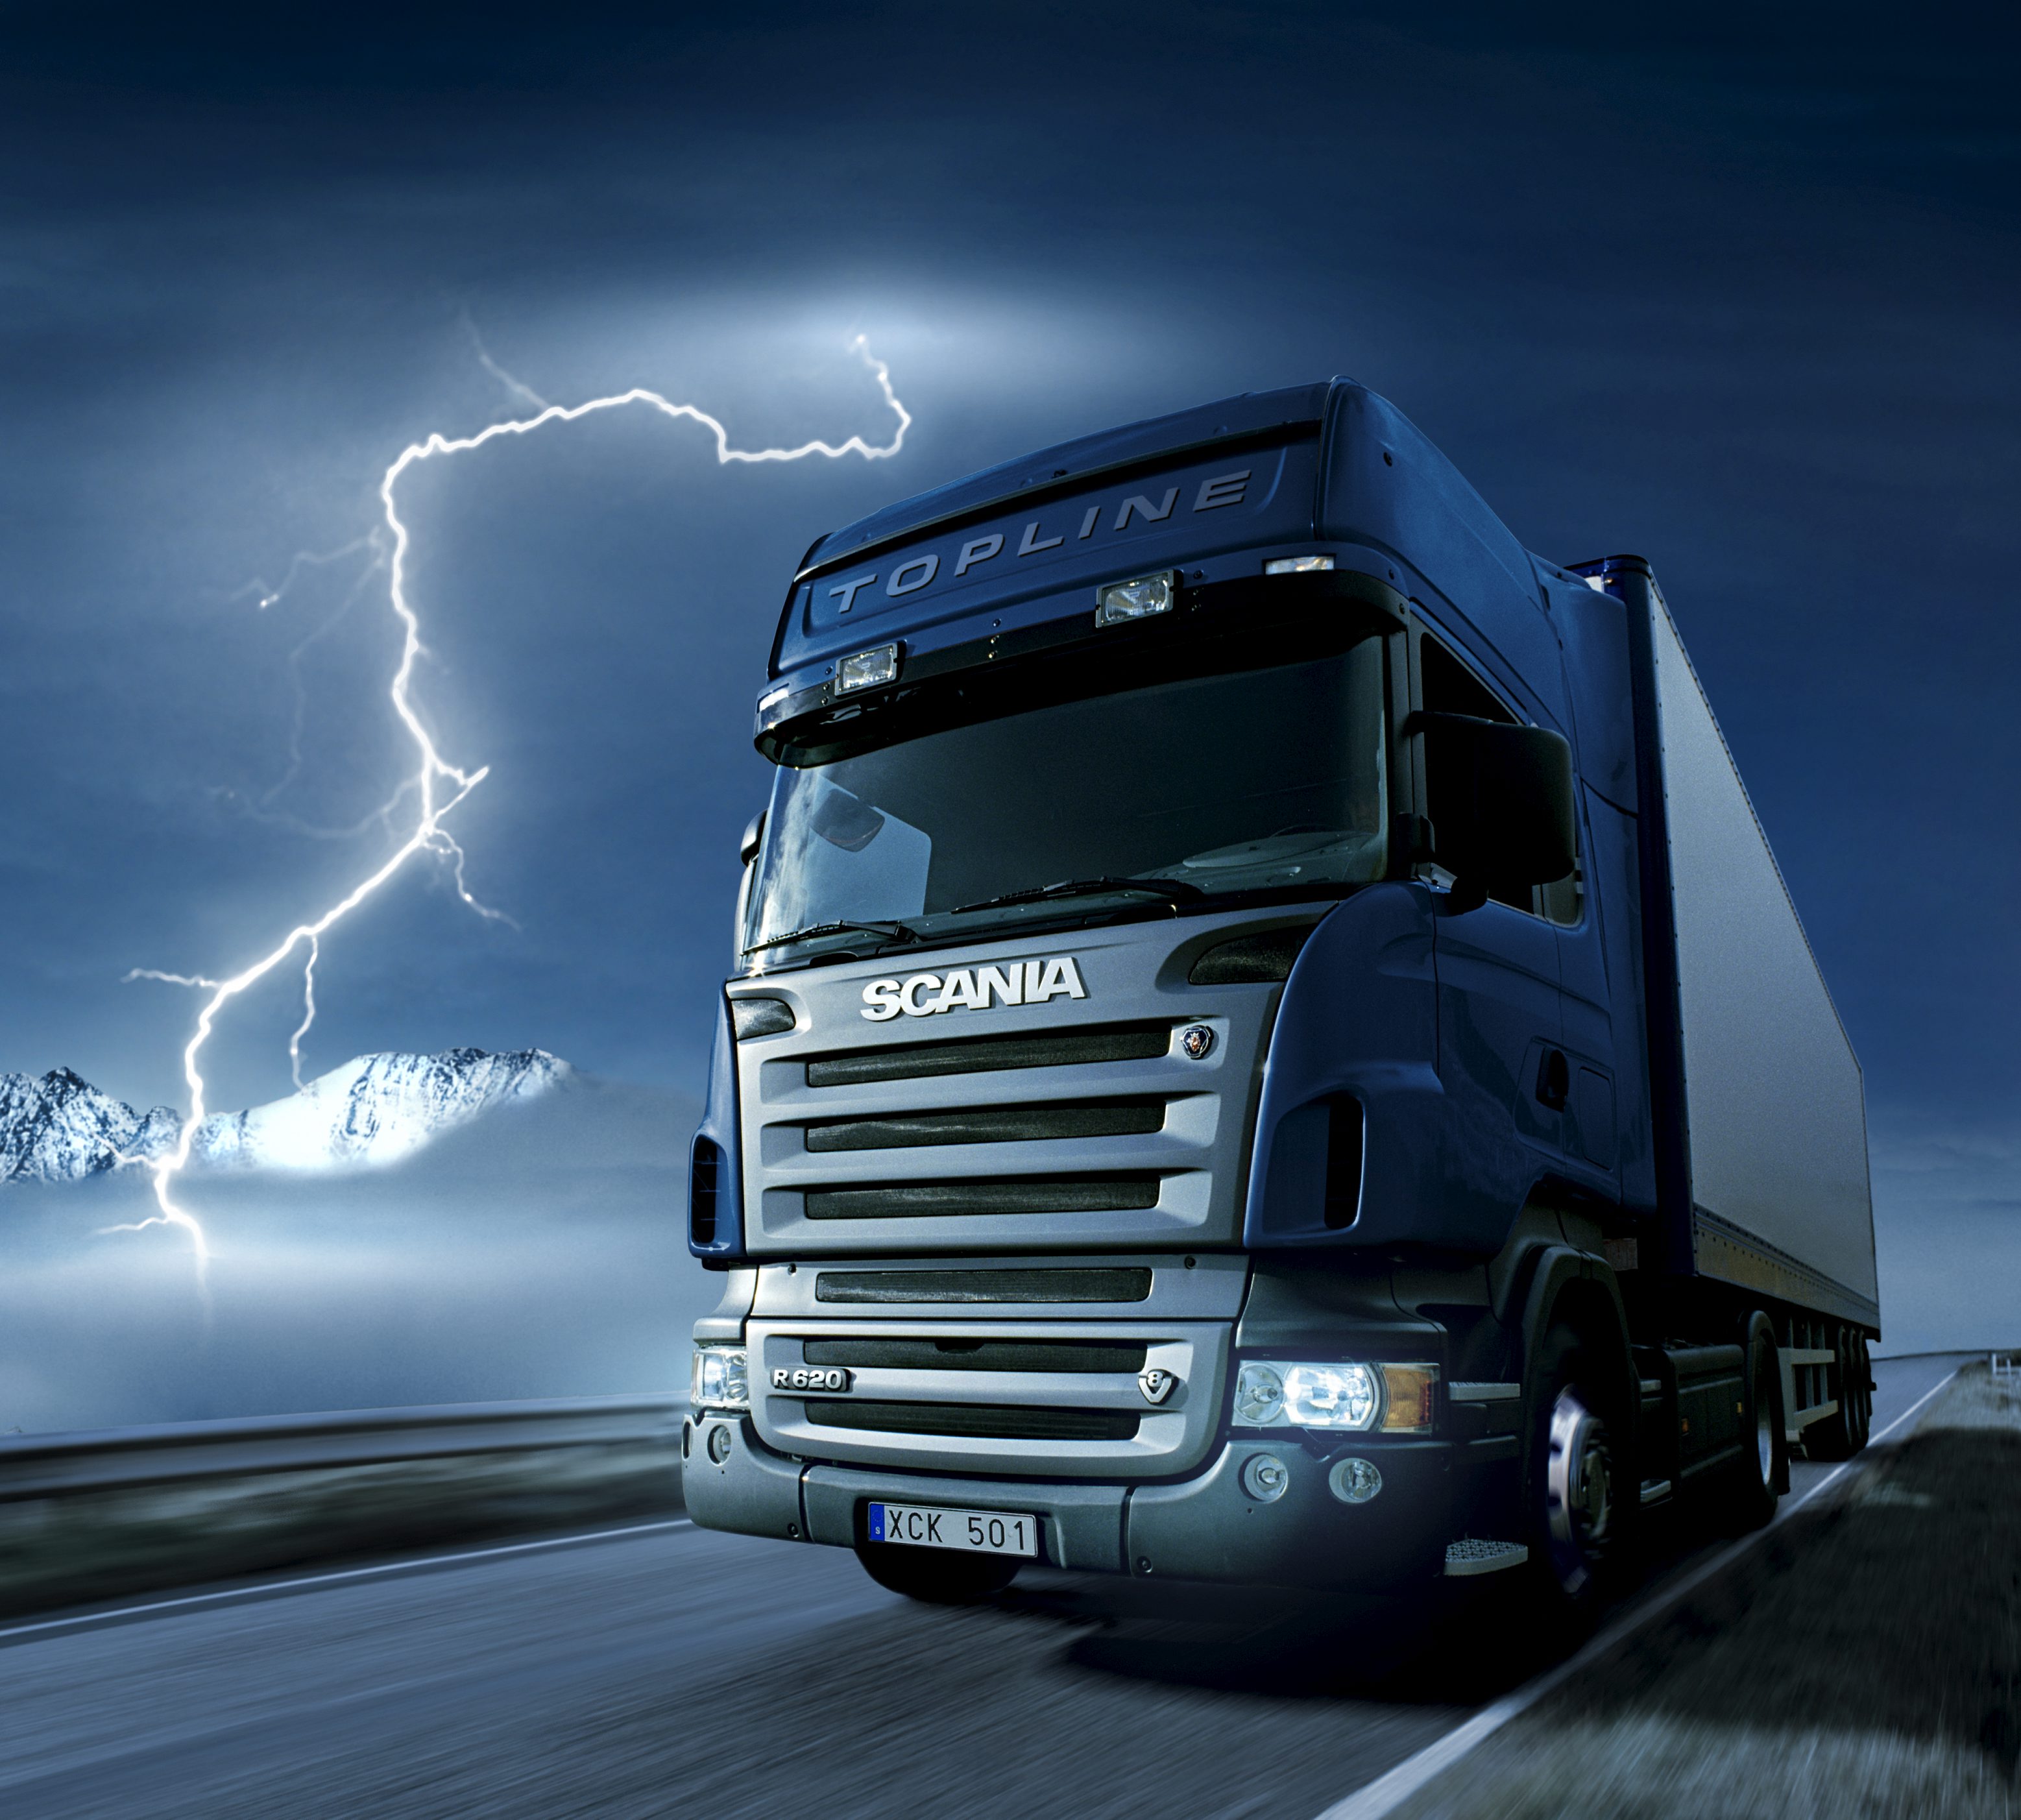 Wallpapers Volvo Truck Fh Hd